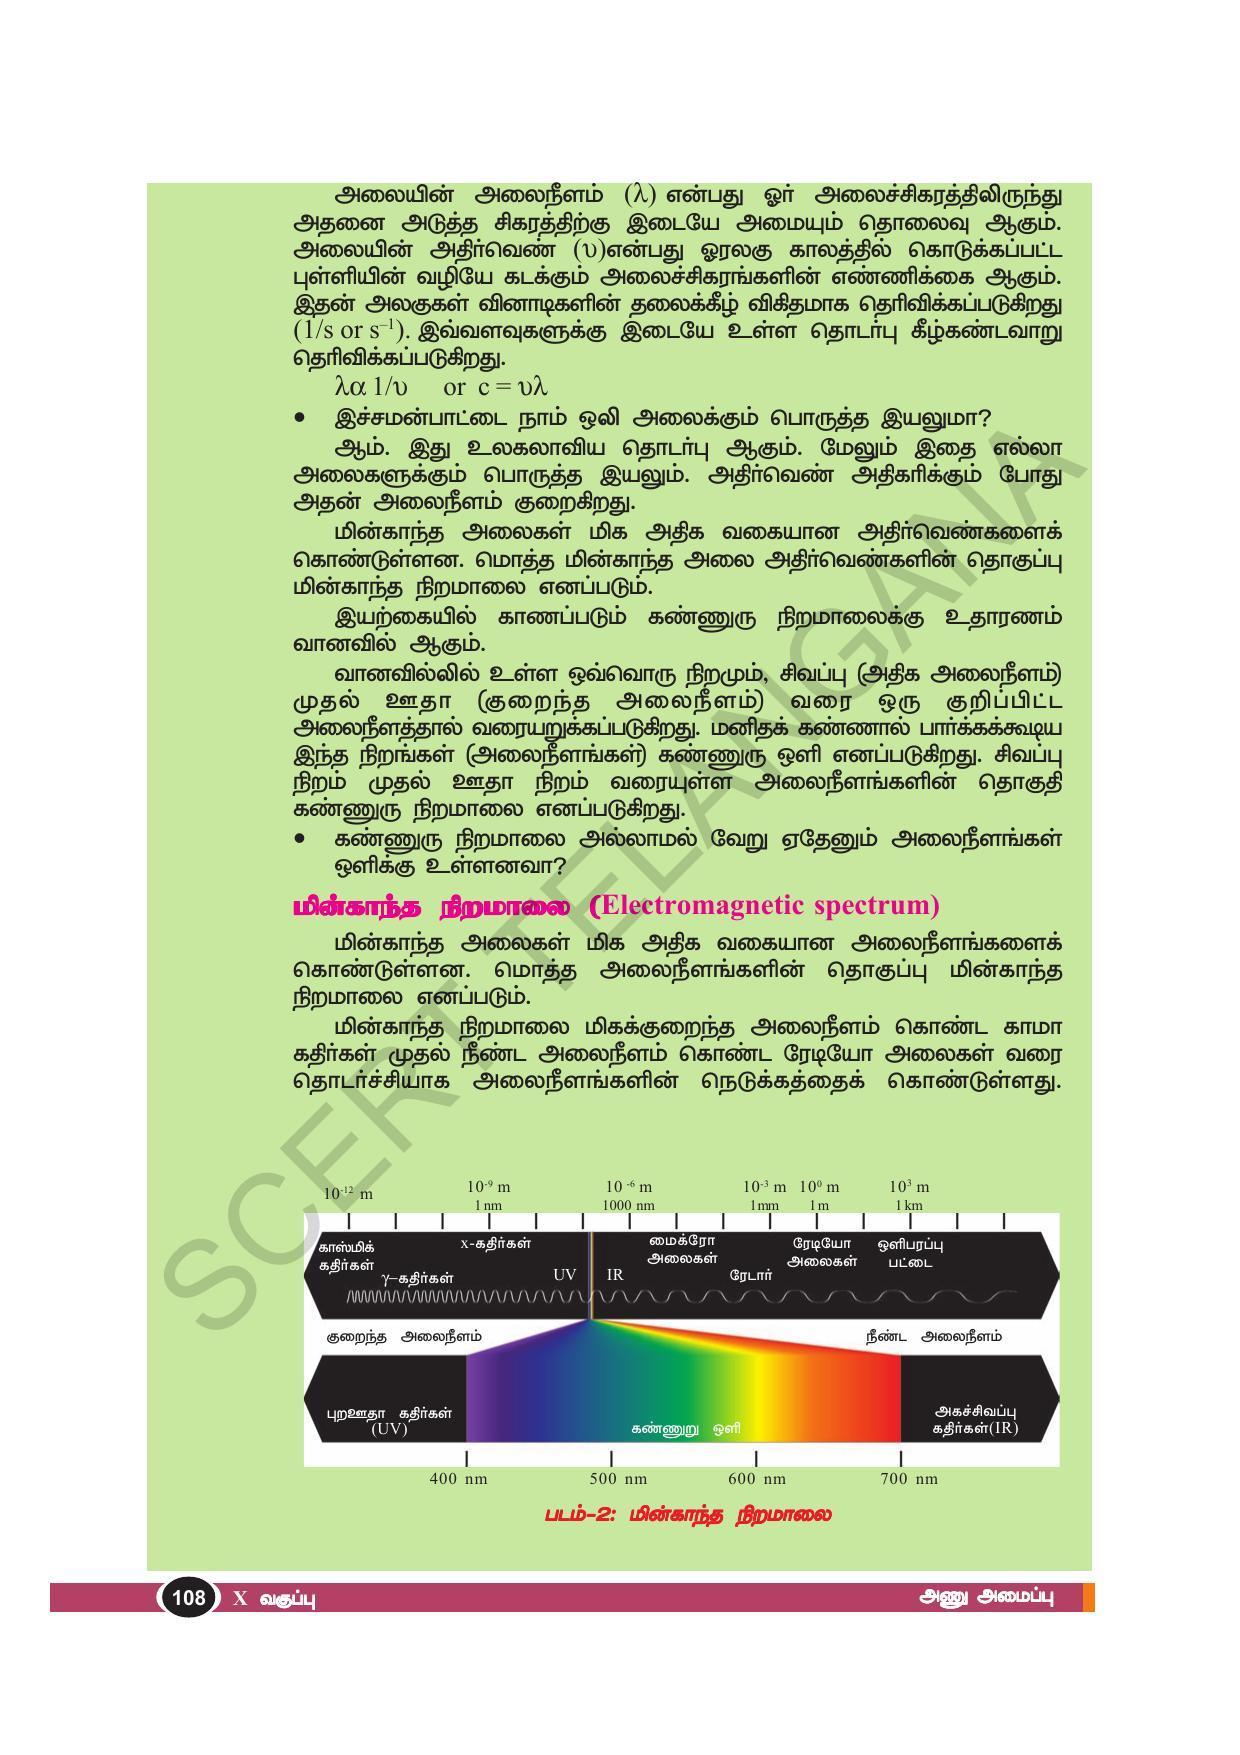 TS SCERT Class 10 Physical Science(Tamil Medium) Text Book - Page 120